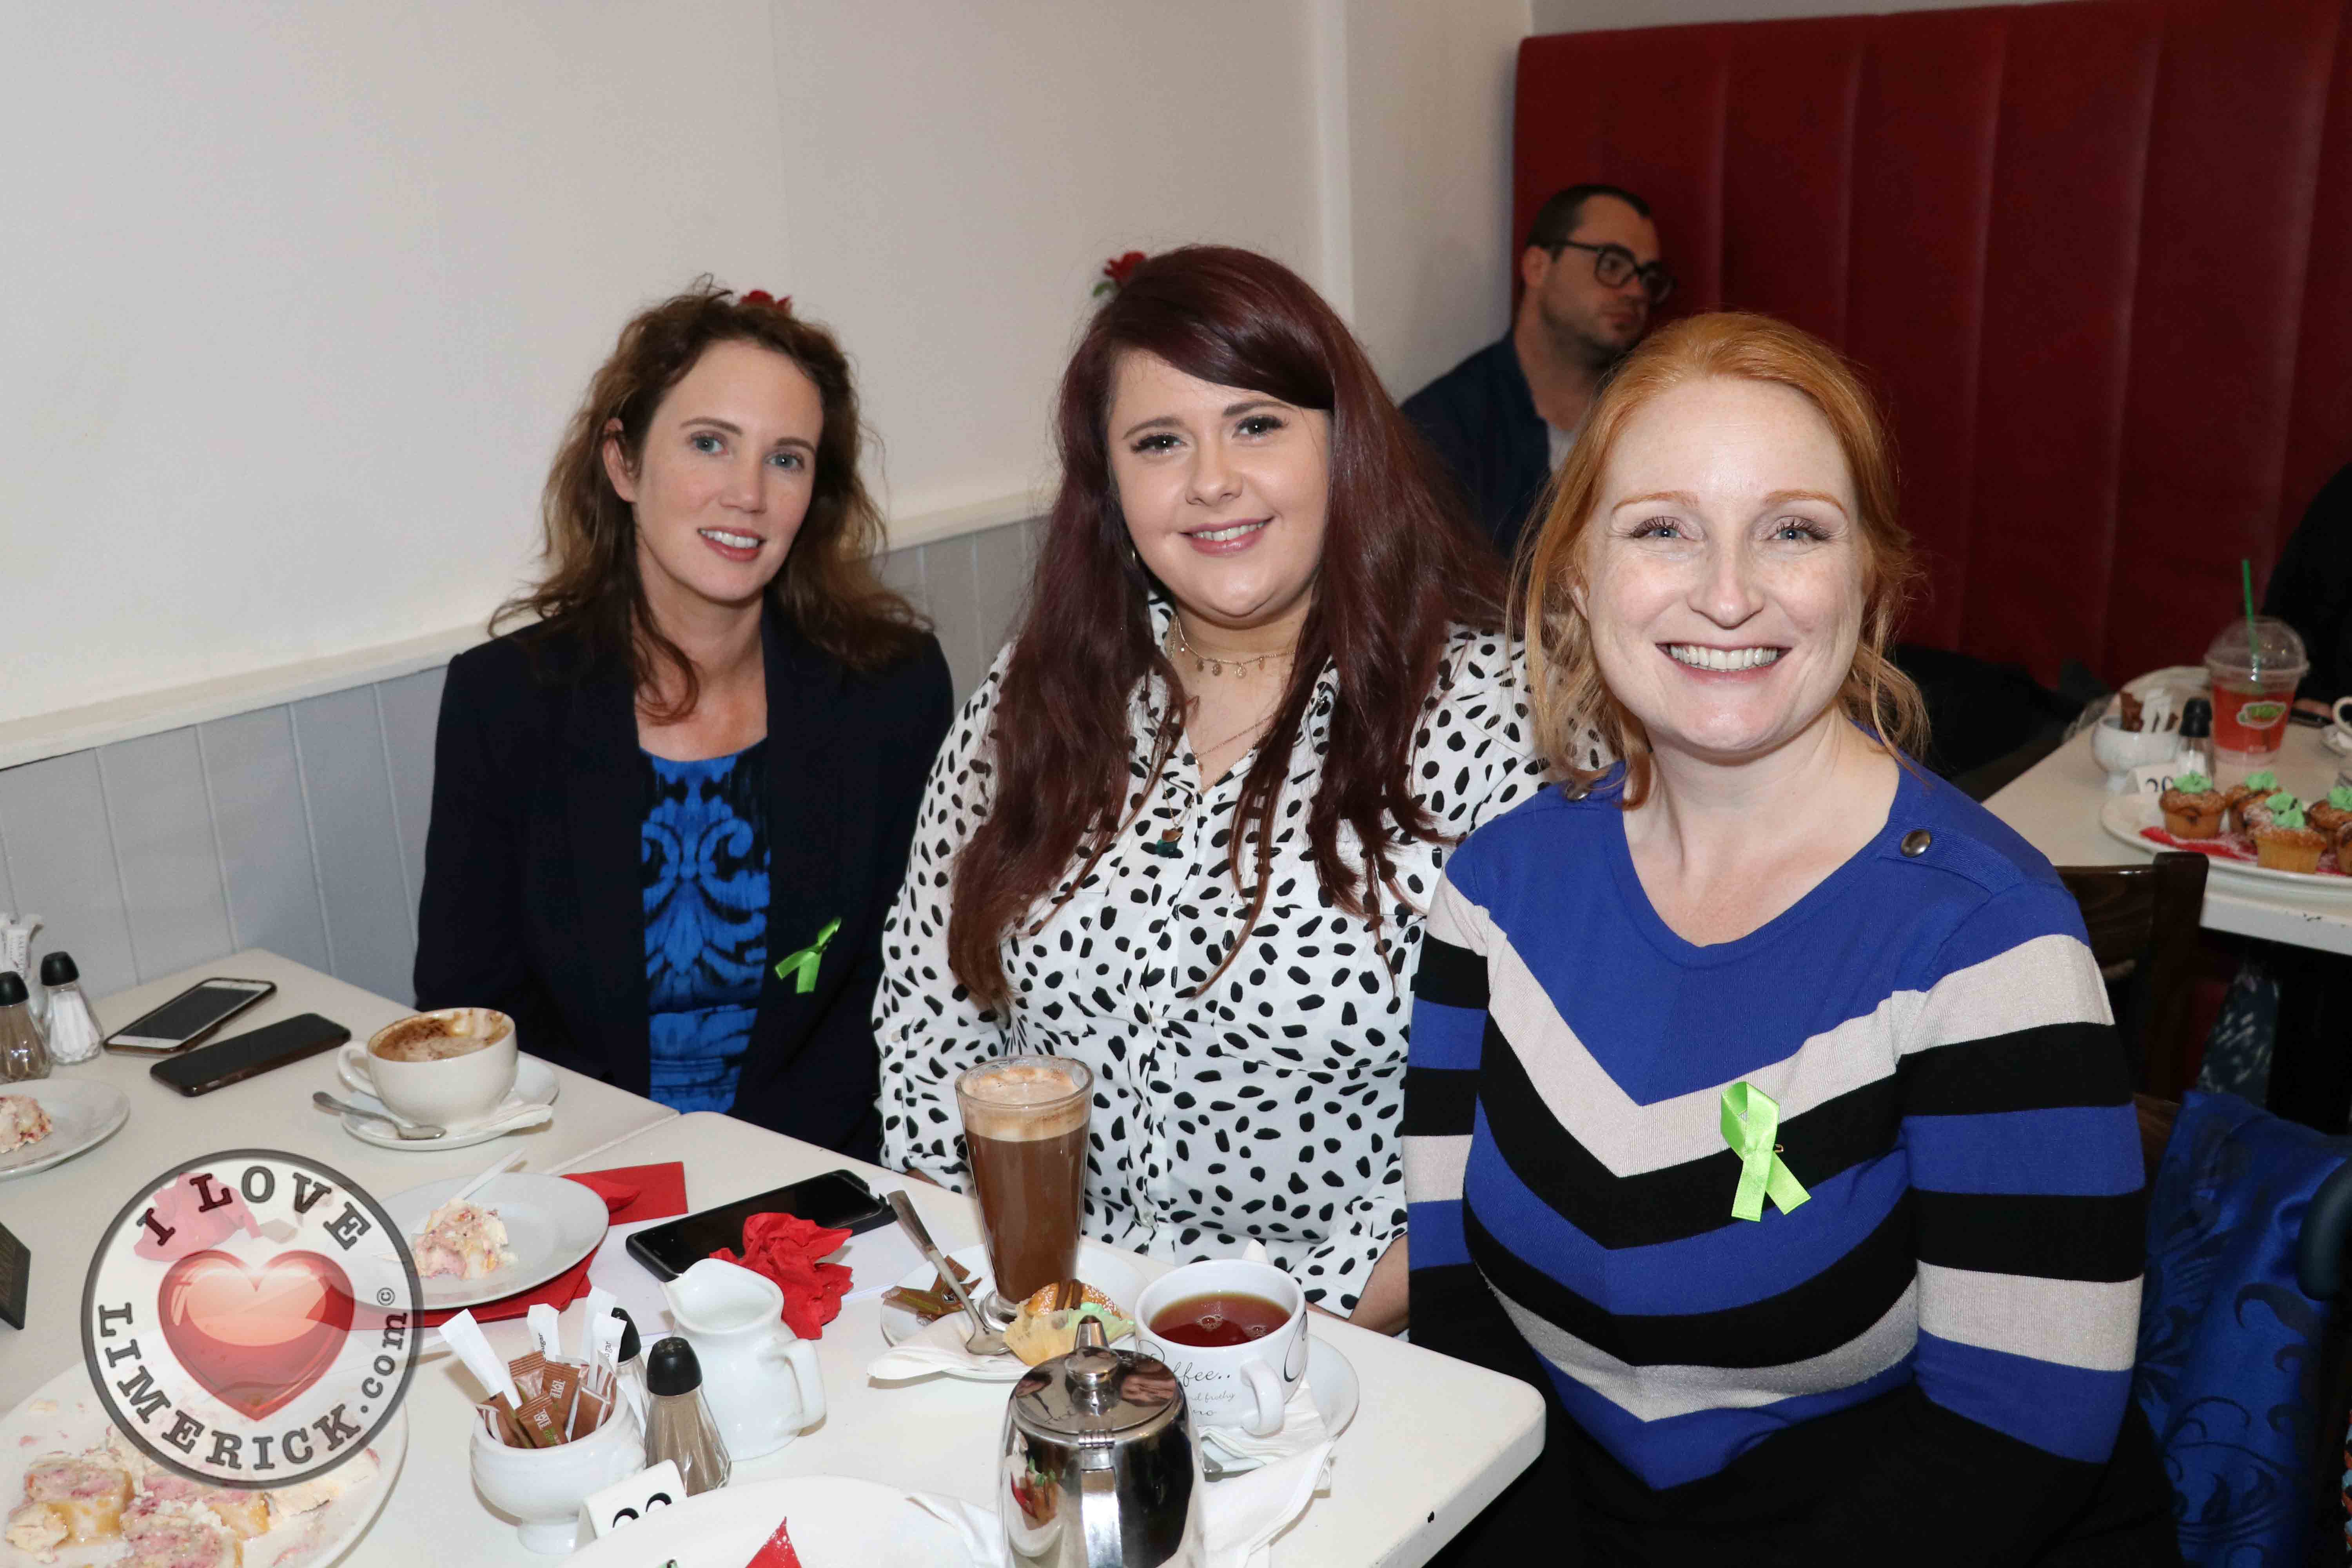 Pictured at the Ruby Sundays cafe for the EmployAbility Limerick's 'Time to Talk' day are Mary McNamee, Limerick Chamber, Caoimhe Moloney, Limerick Chamber, and Sinead Clinton, Metis Ireland. Picture: Conor Owens/ilovelimerick.